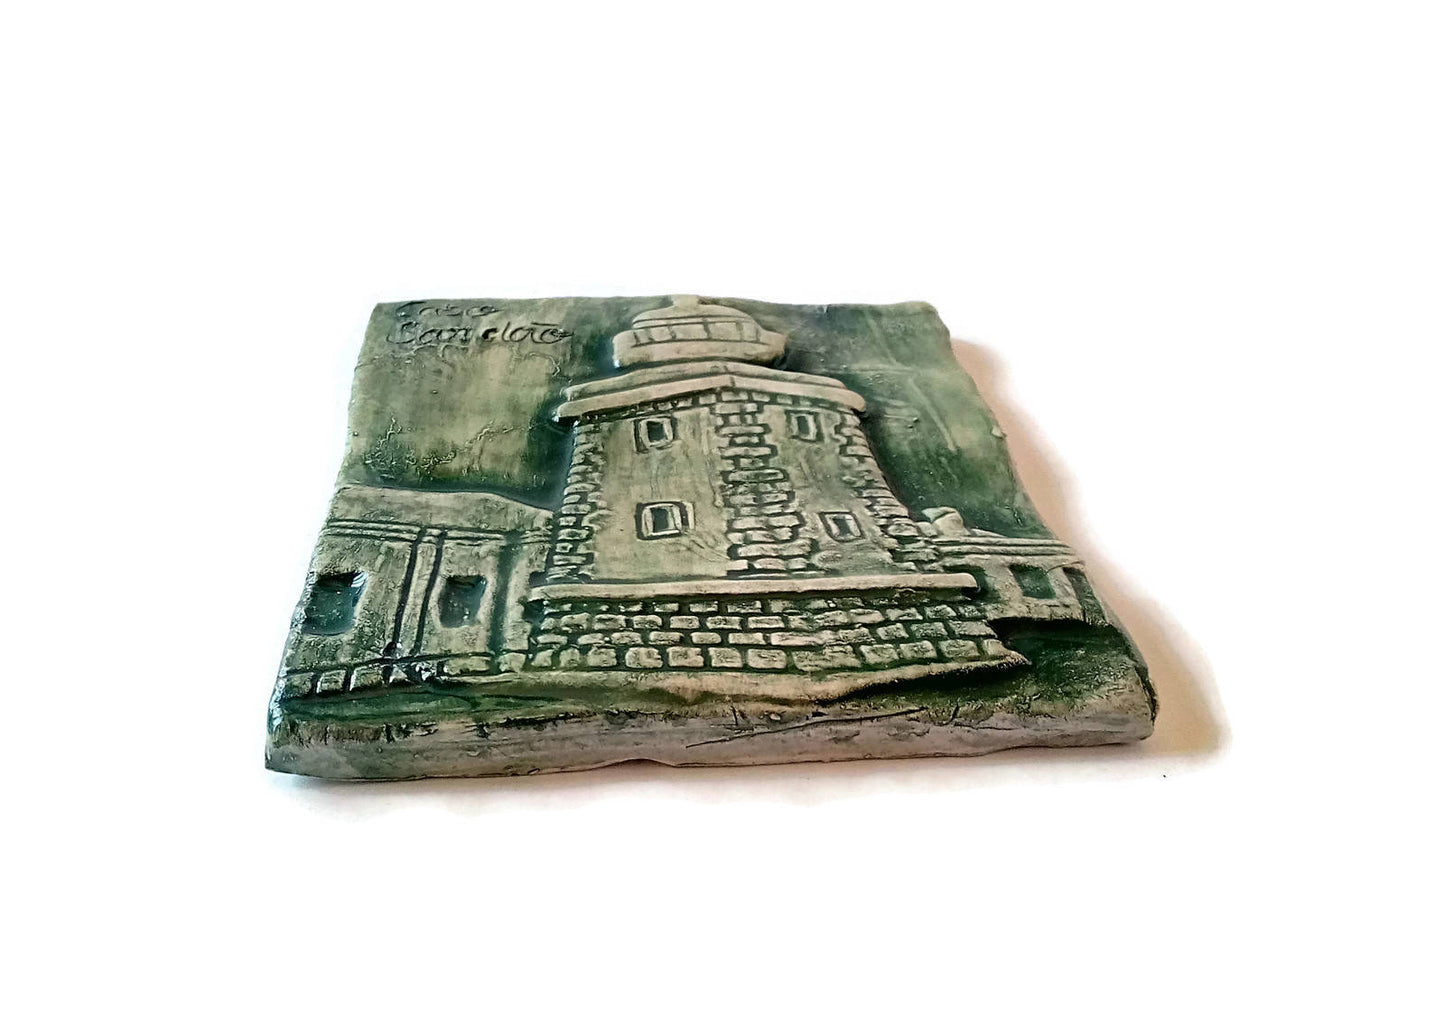 HANDMADE CERAMIC TILES, Lighthouse Wall Hanging Tiles, Portuguese pottery office wall decor Best Gifts For Him, Housewarming Gift First Home - Ceramica Ana Rafael